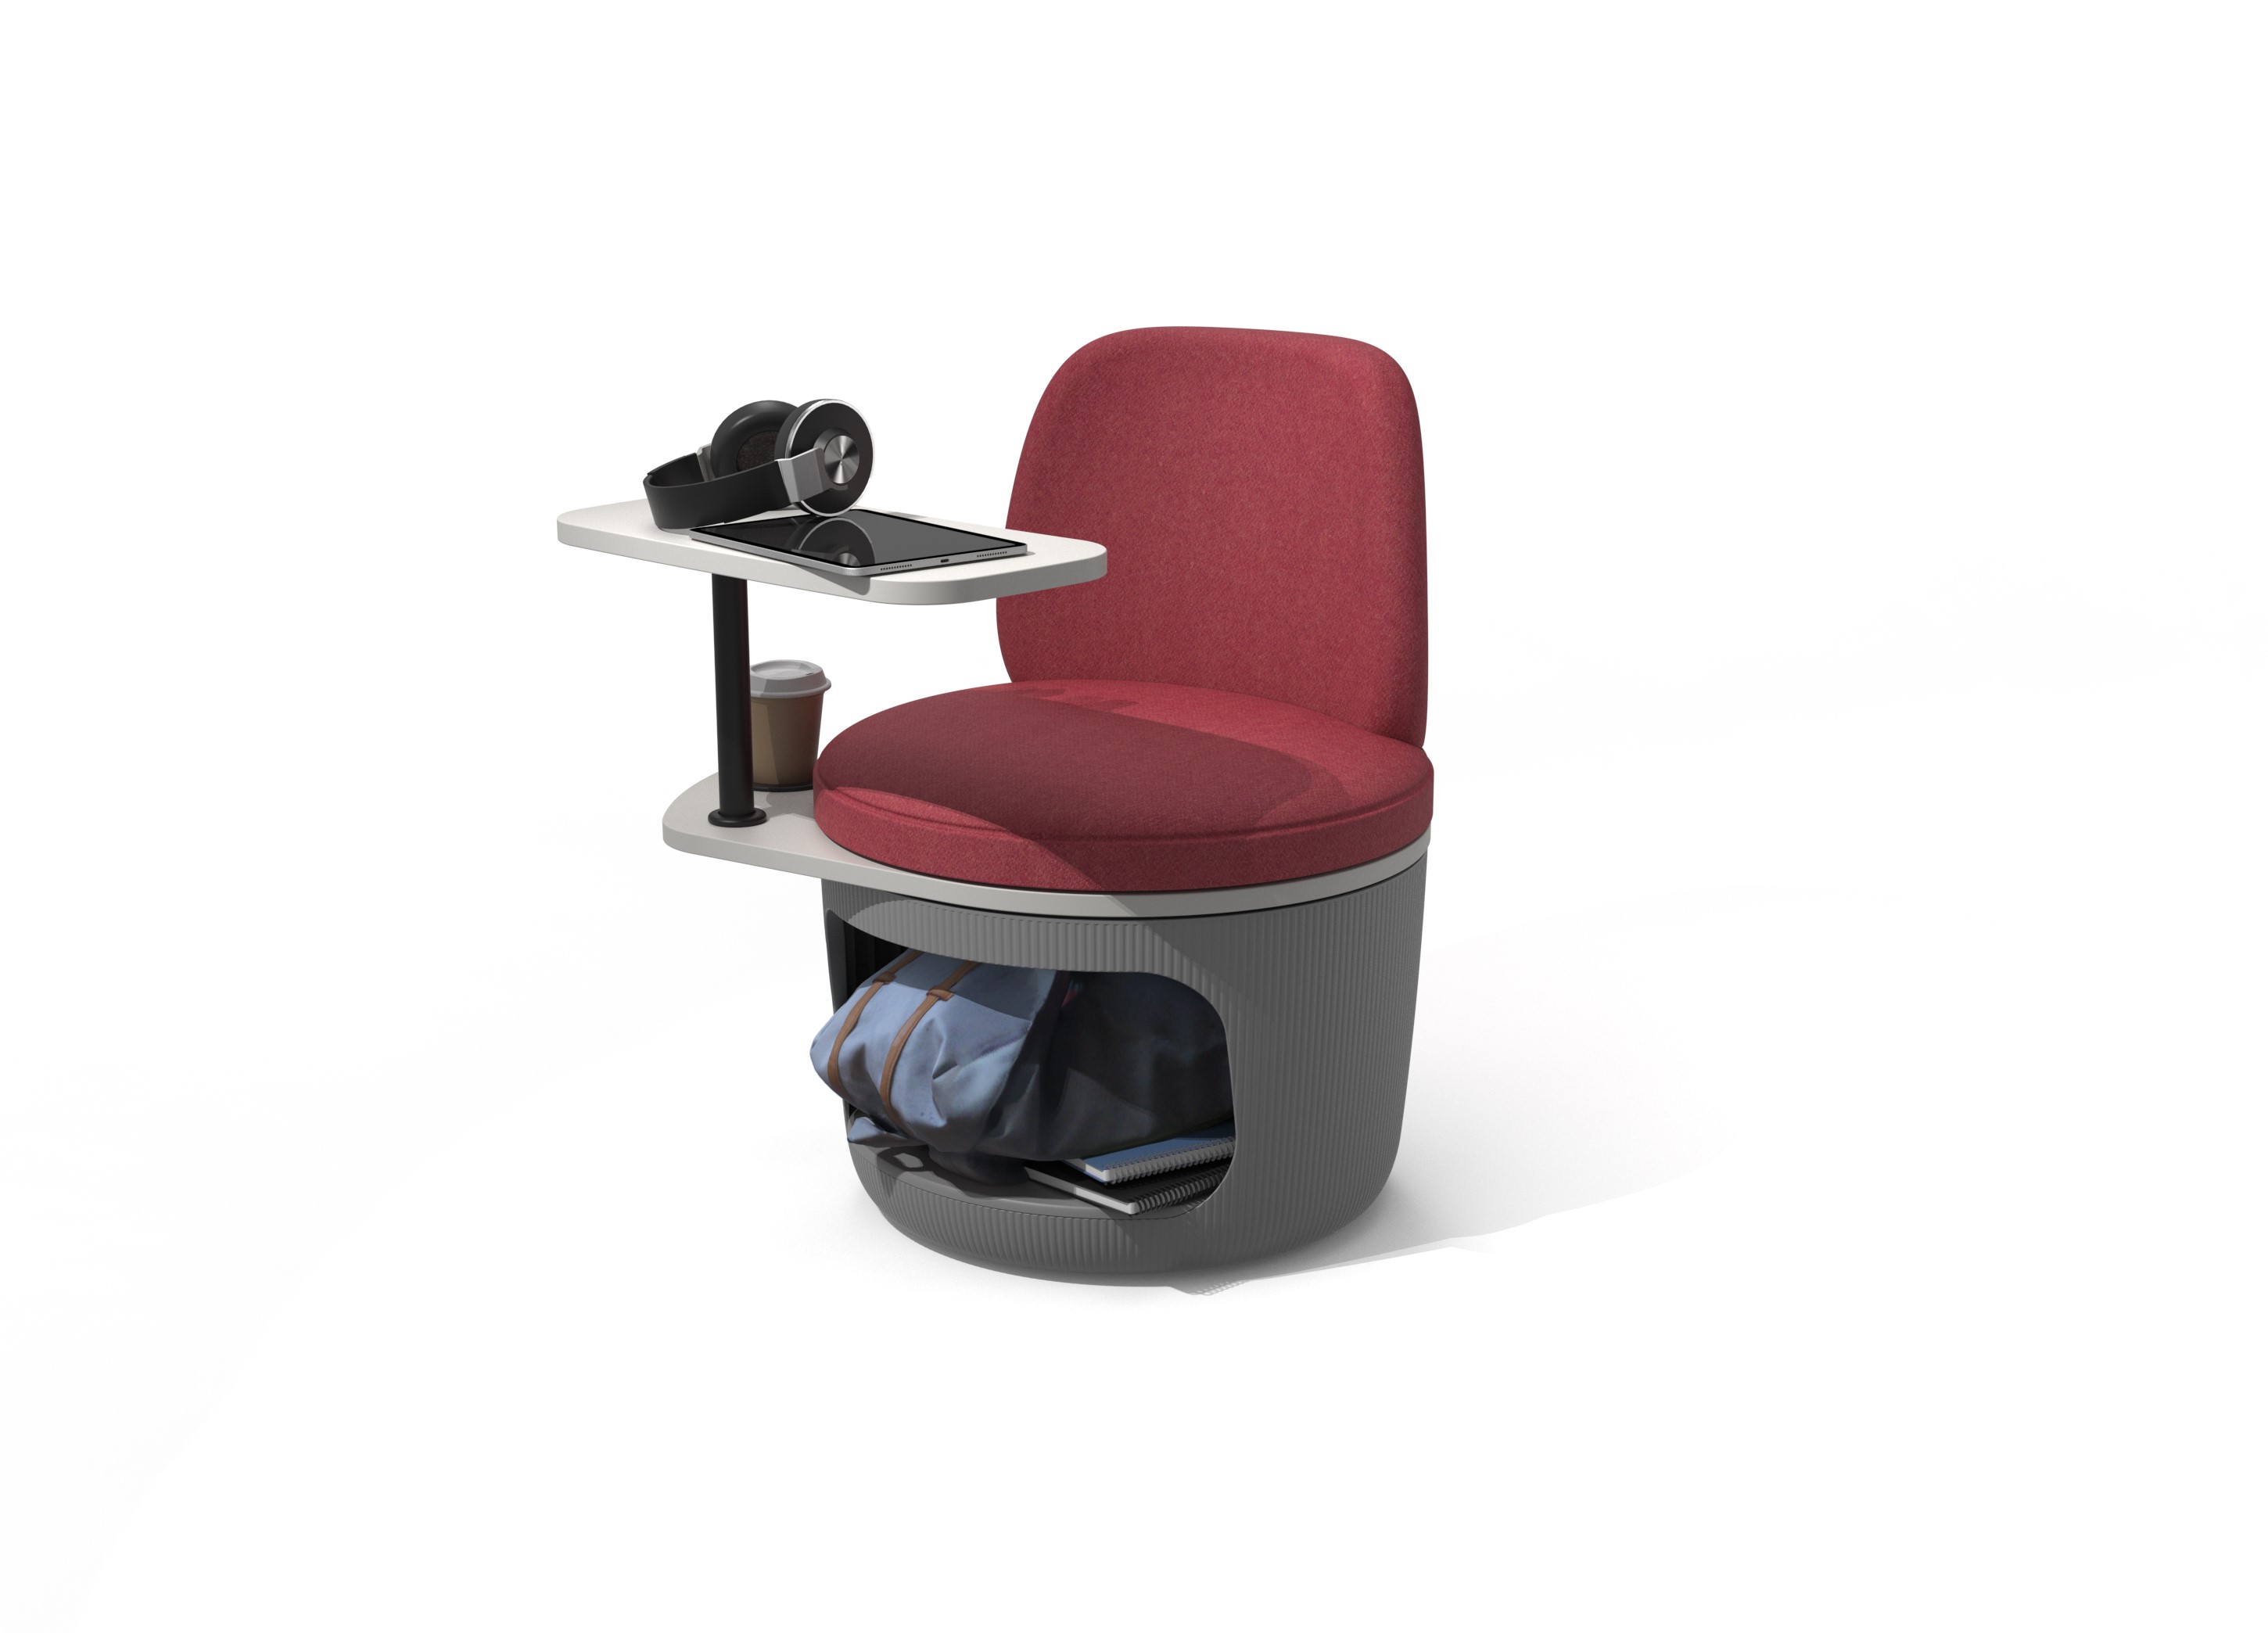 Res Lowback Chair with school bag in storage compartment, coffee cup in the cupholder, and electronics on tablet. 